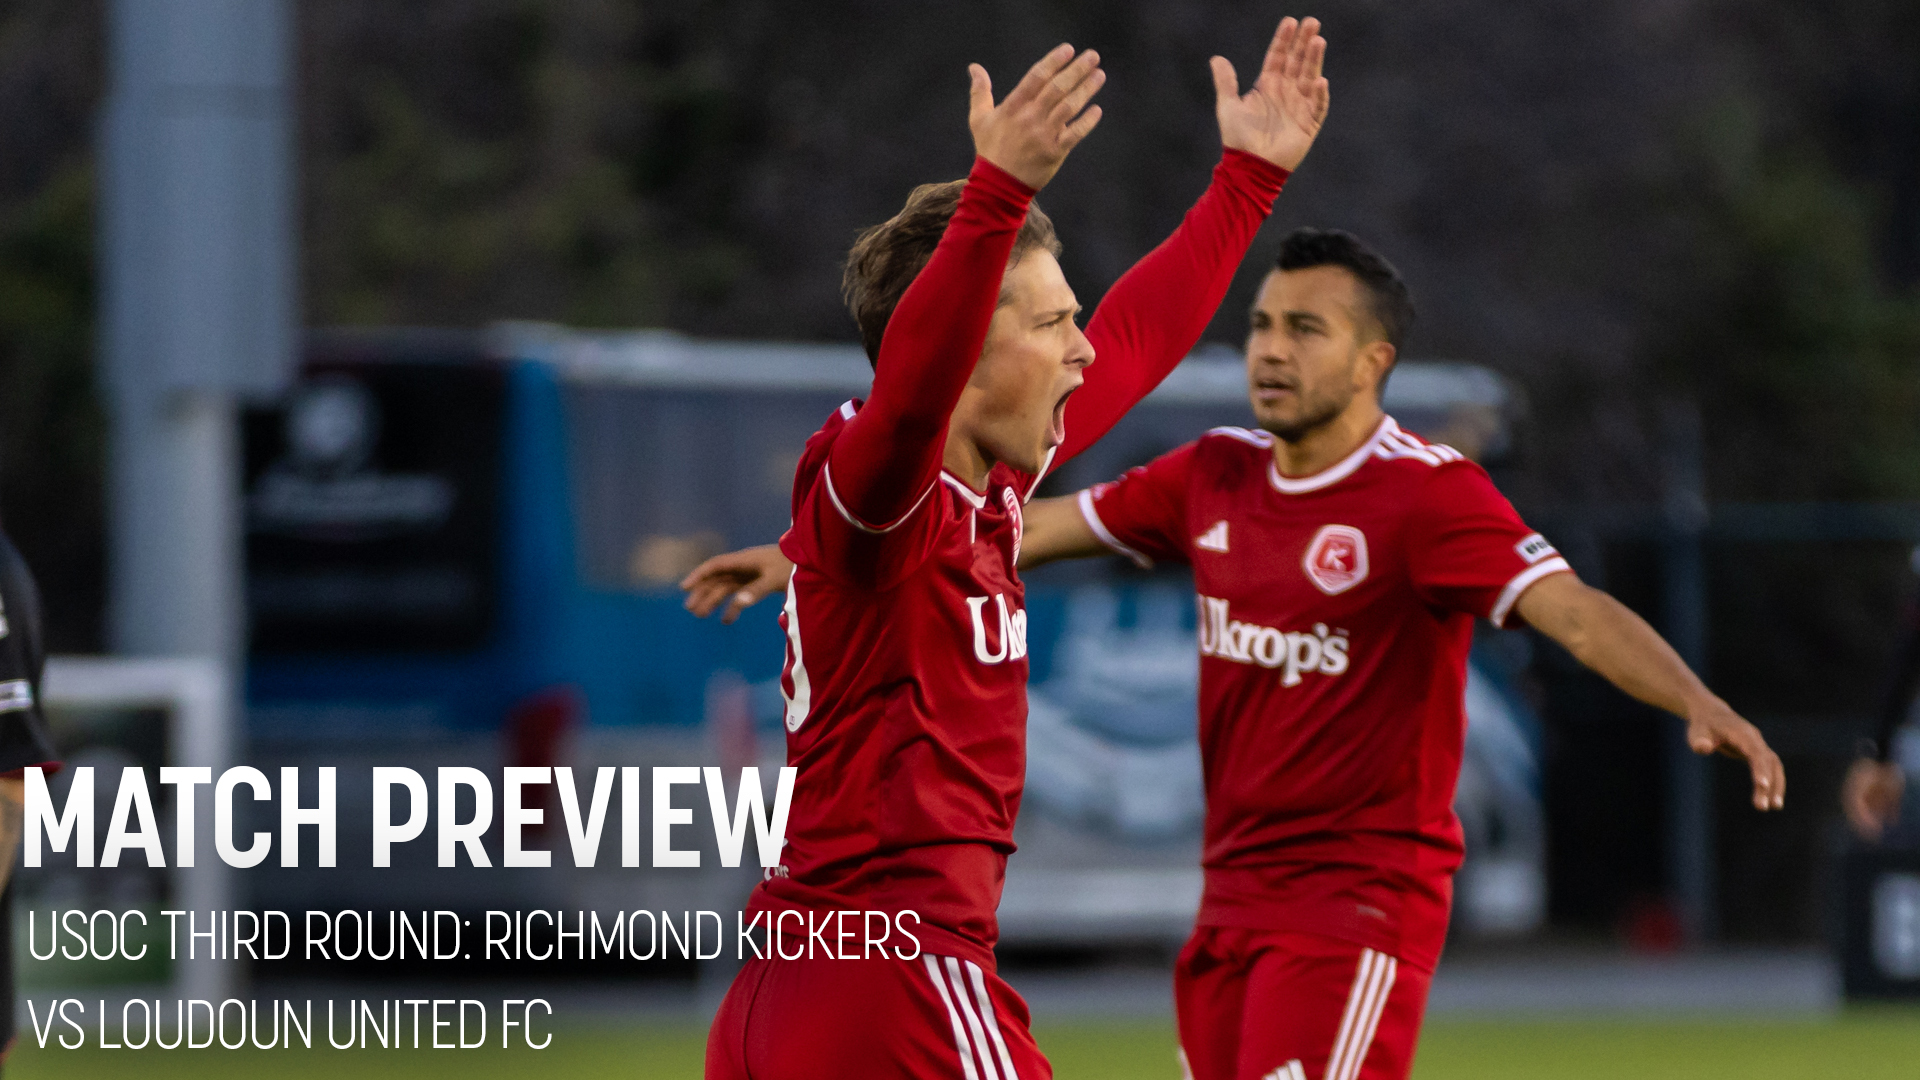 Match Preview: Kickers Host USL Championship Side Loudoun United in Open Cup Third Round featured image